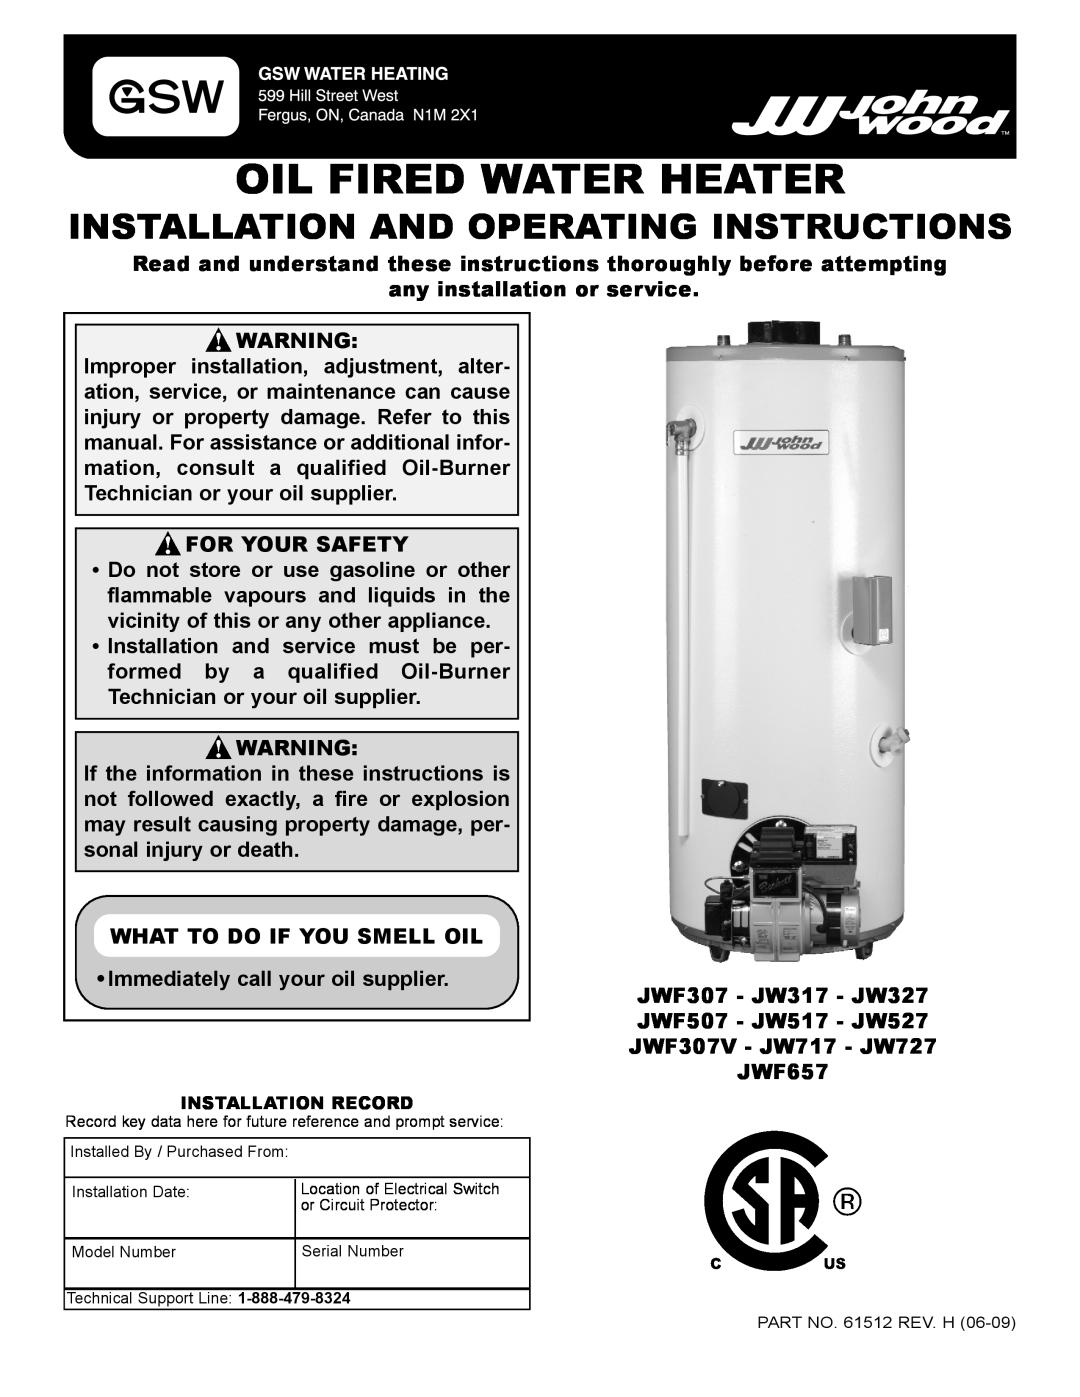 GSW JWF657, JWF507 manual Oil Fired Water Heater, Installation And Operating Instructions 